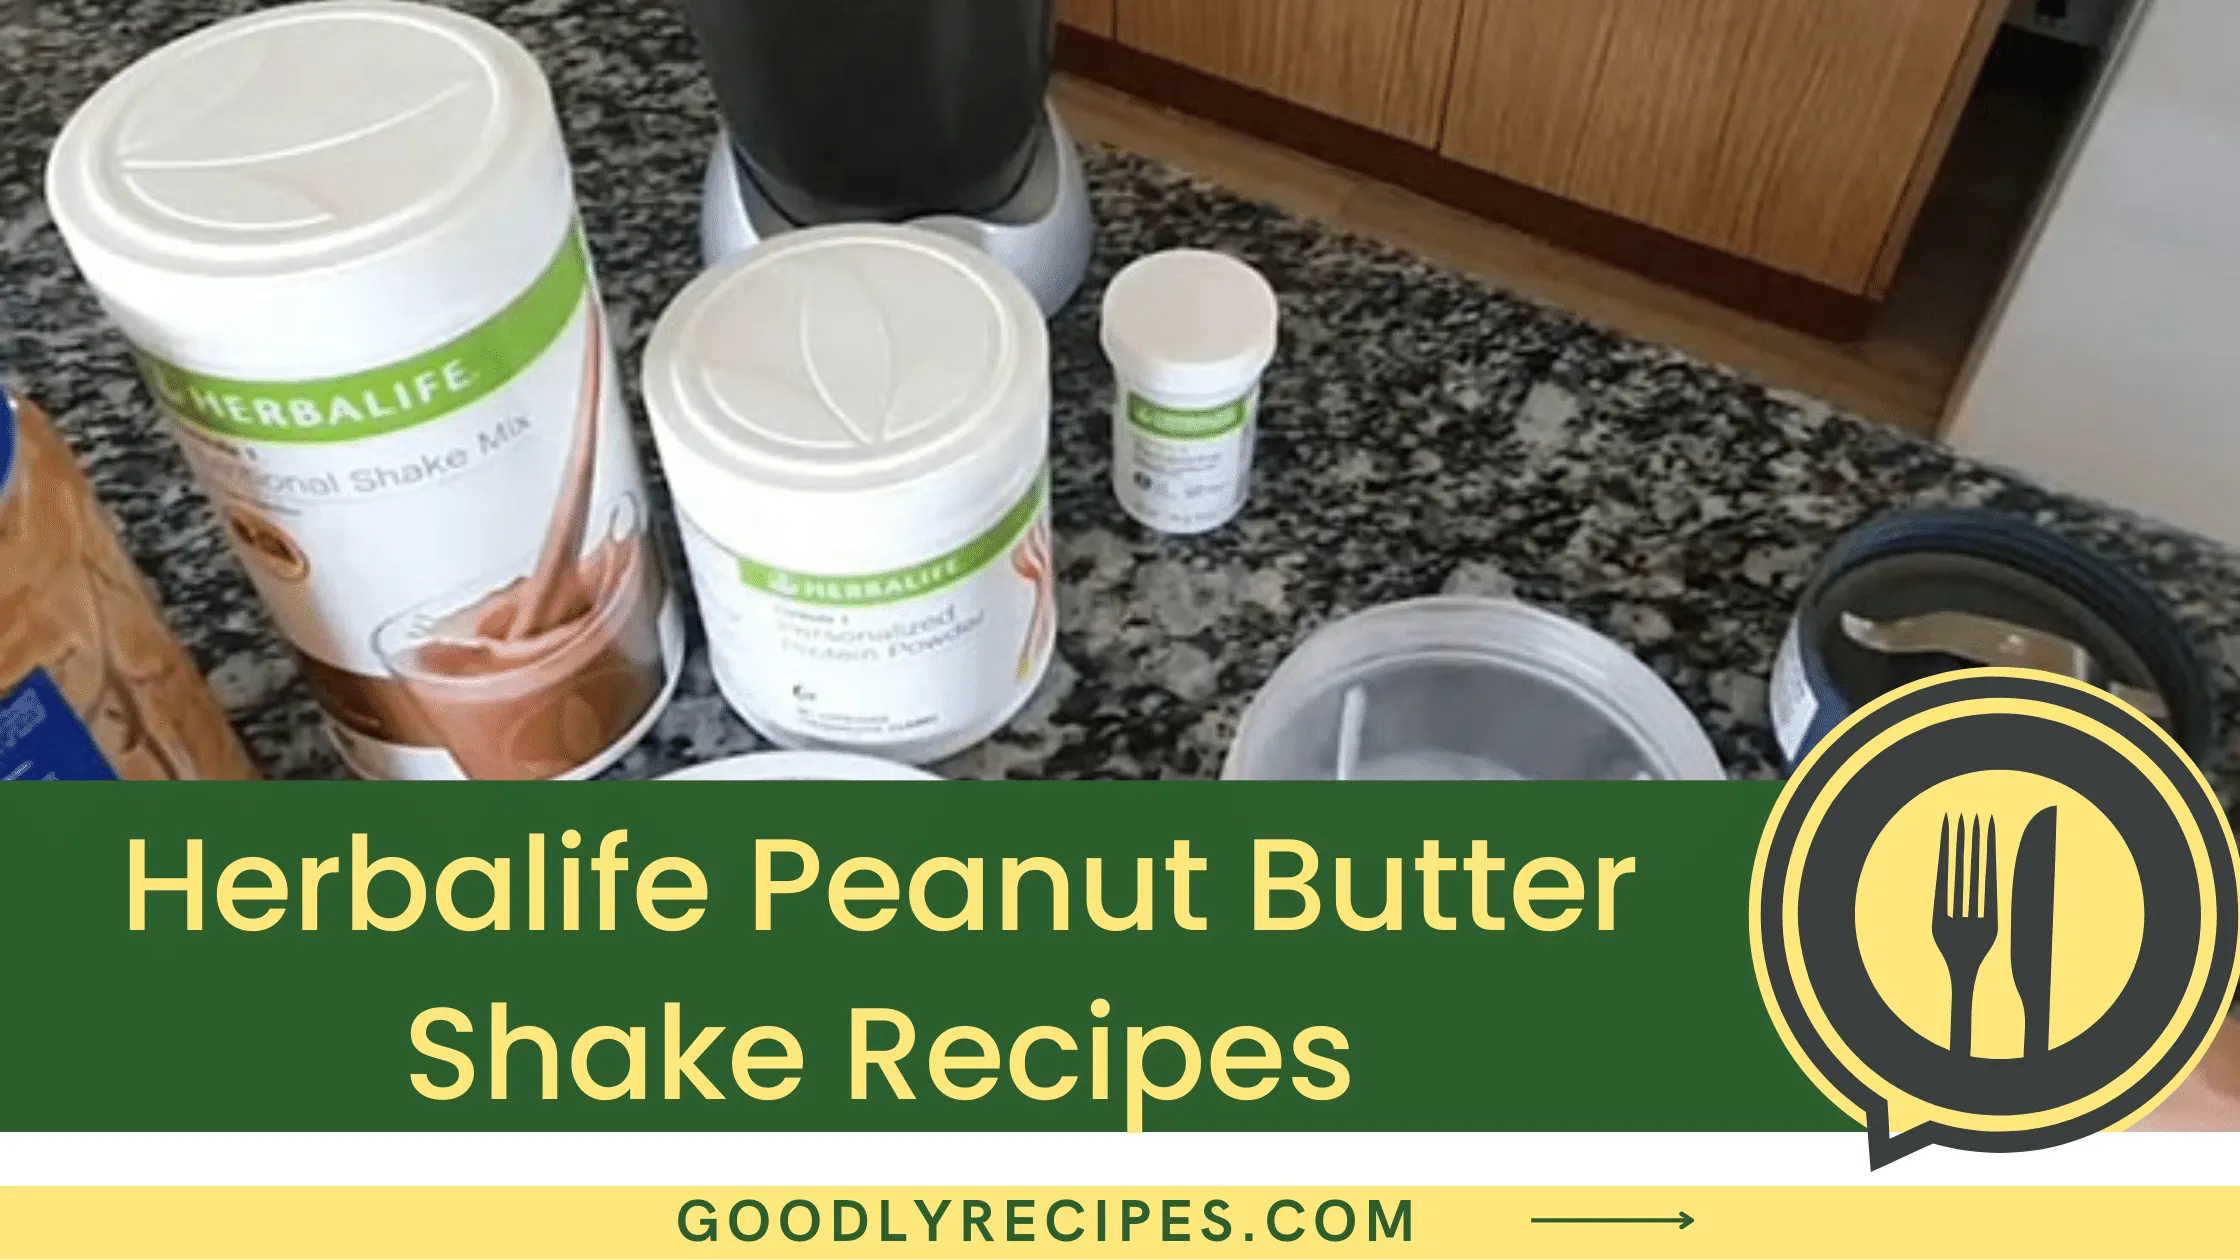 Herbalife Peanut Butter Shake Recipes - For Food Lovers